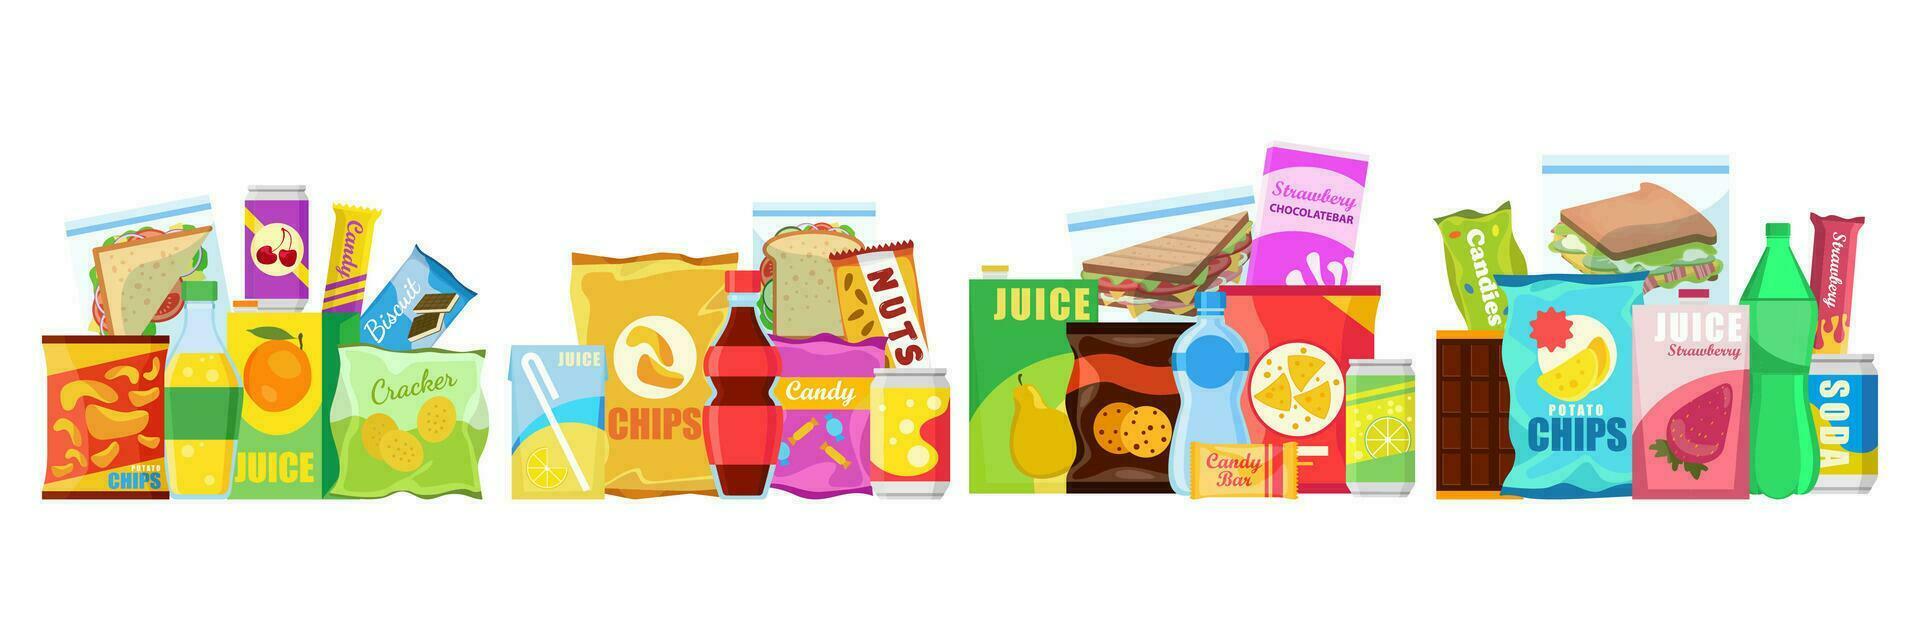 Snack product set, fast food snacks, drinks, nuts, chips, cracker, juice, sandwich isolated on white background. Unhealthy junk food. Flat illustration in vector. vector